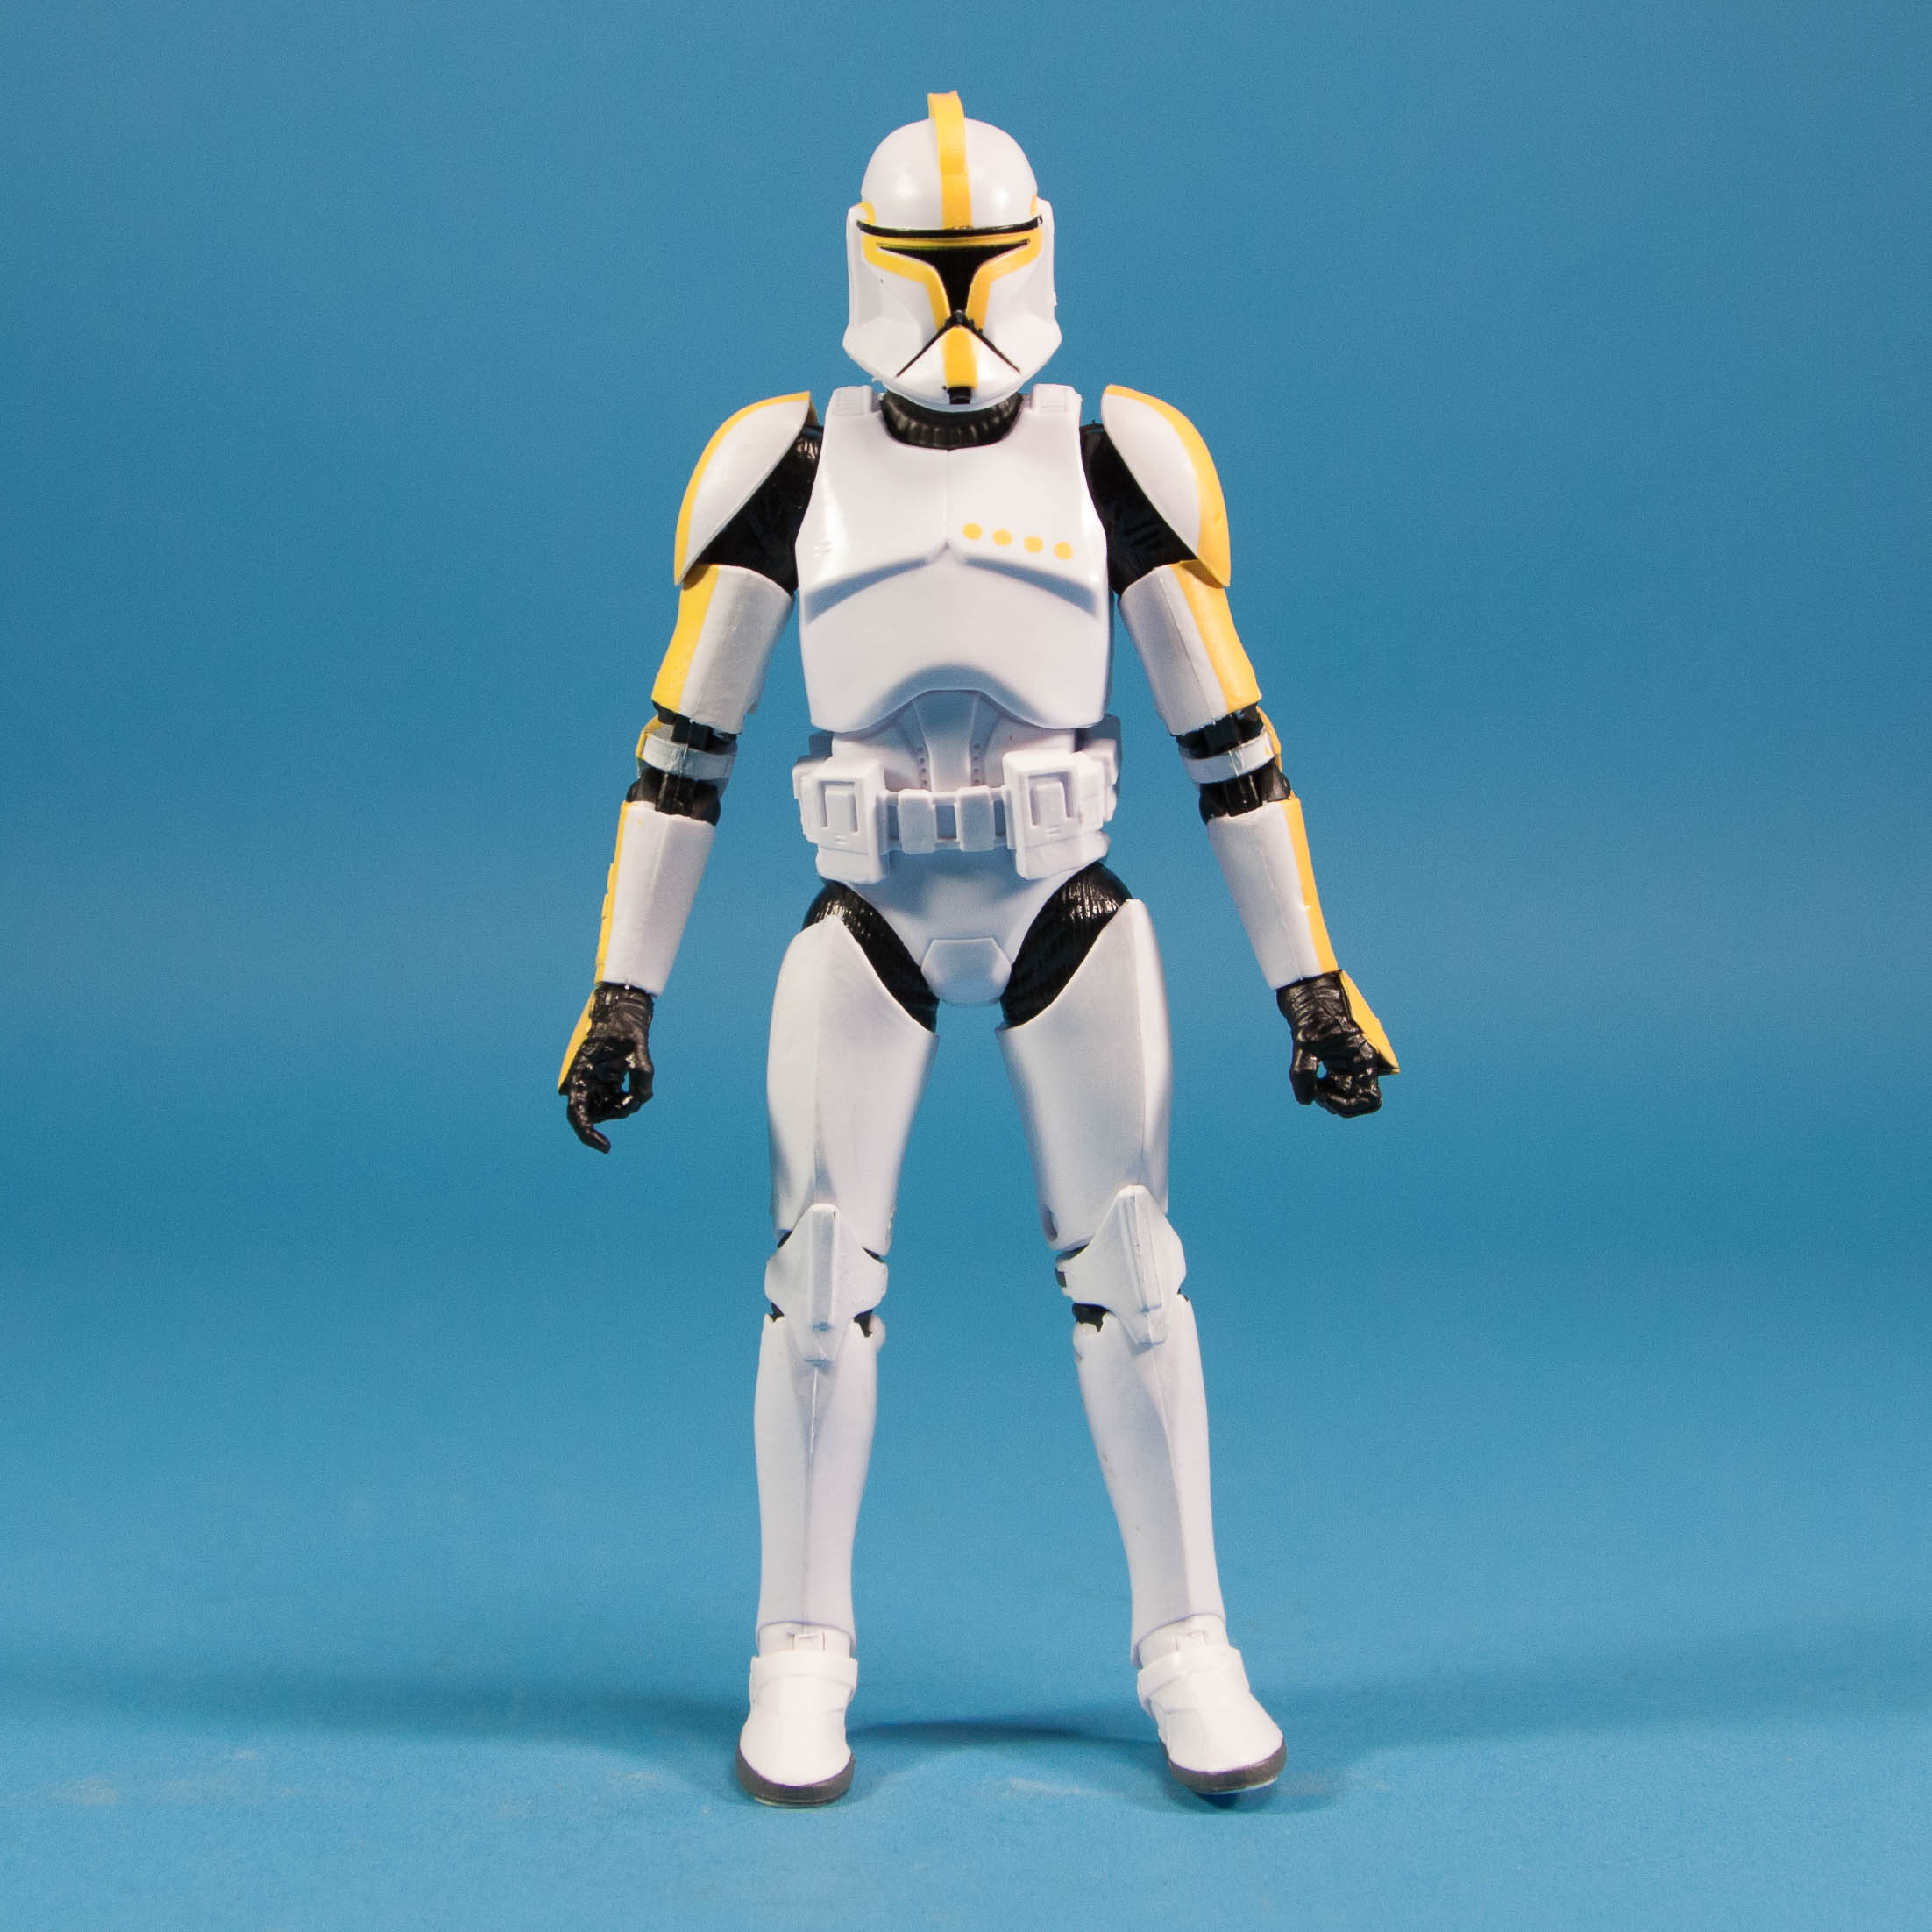 stormtrooper-collection-6-inch-4-pack-amazon-exclusive-001.jpg